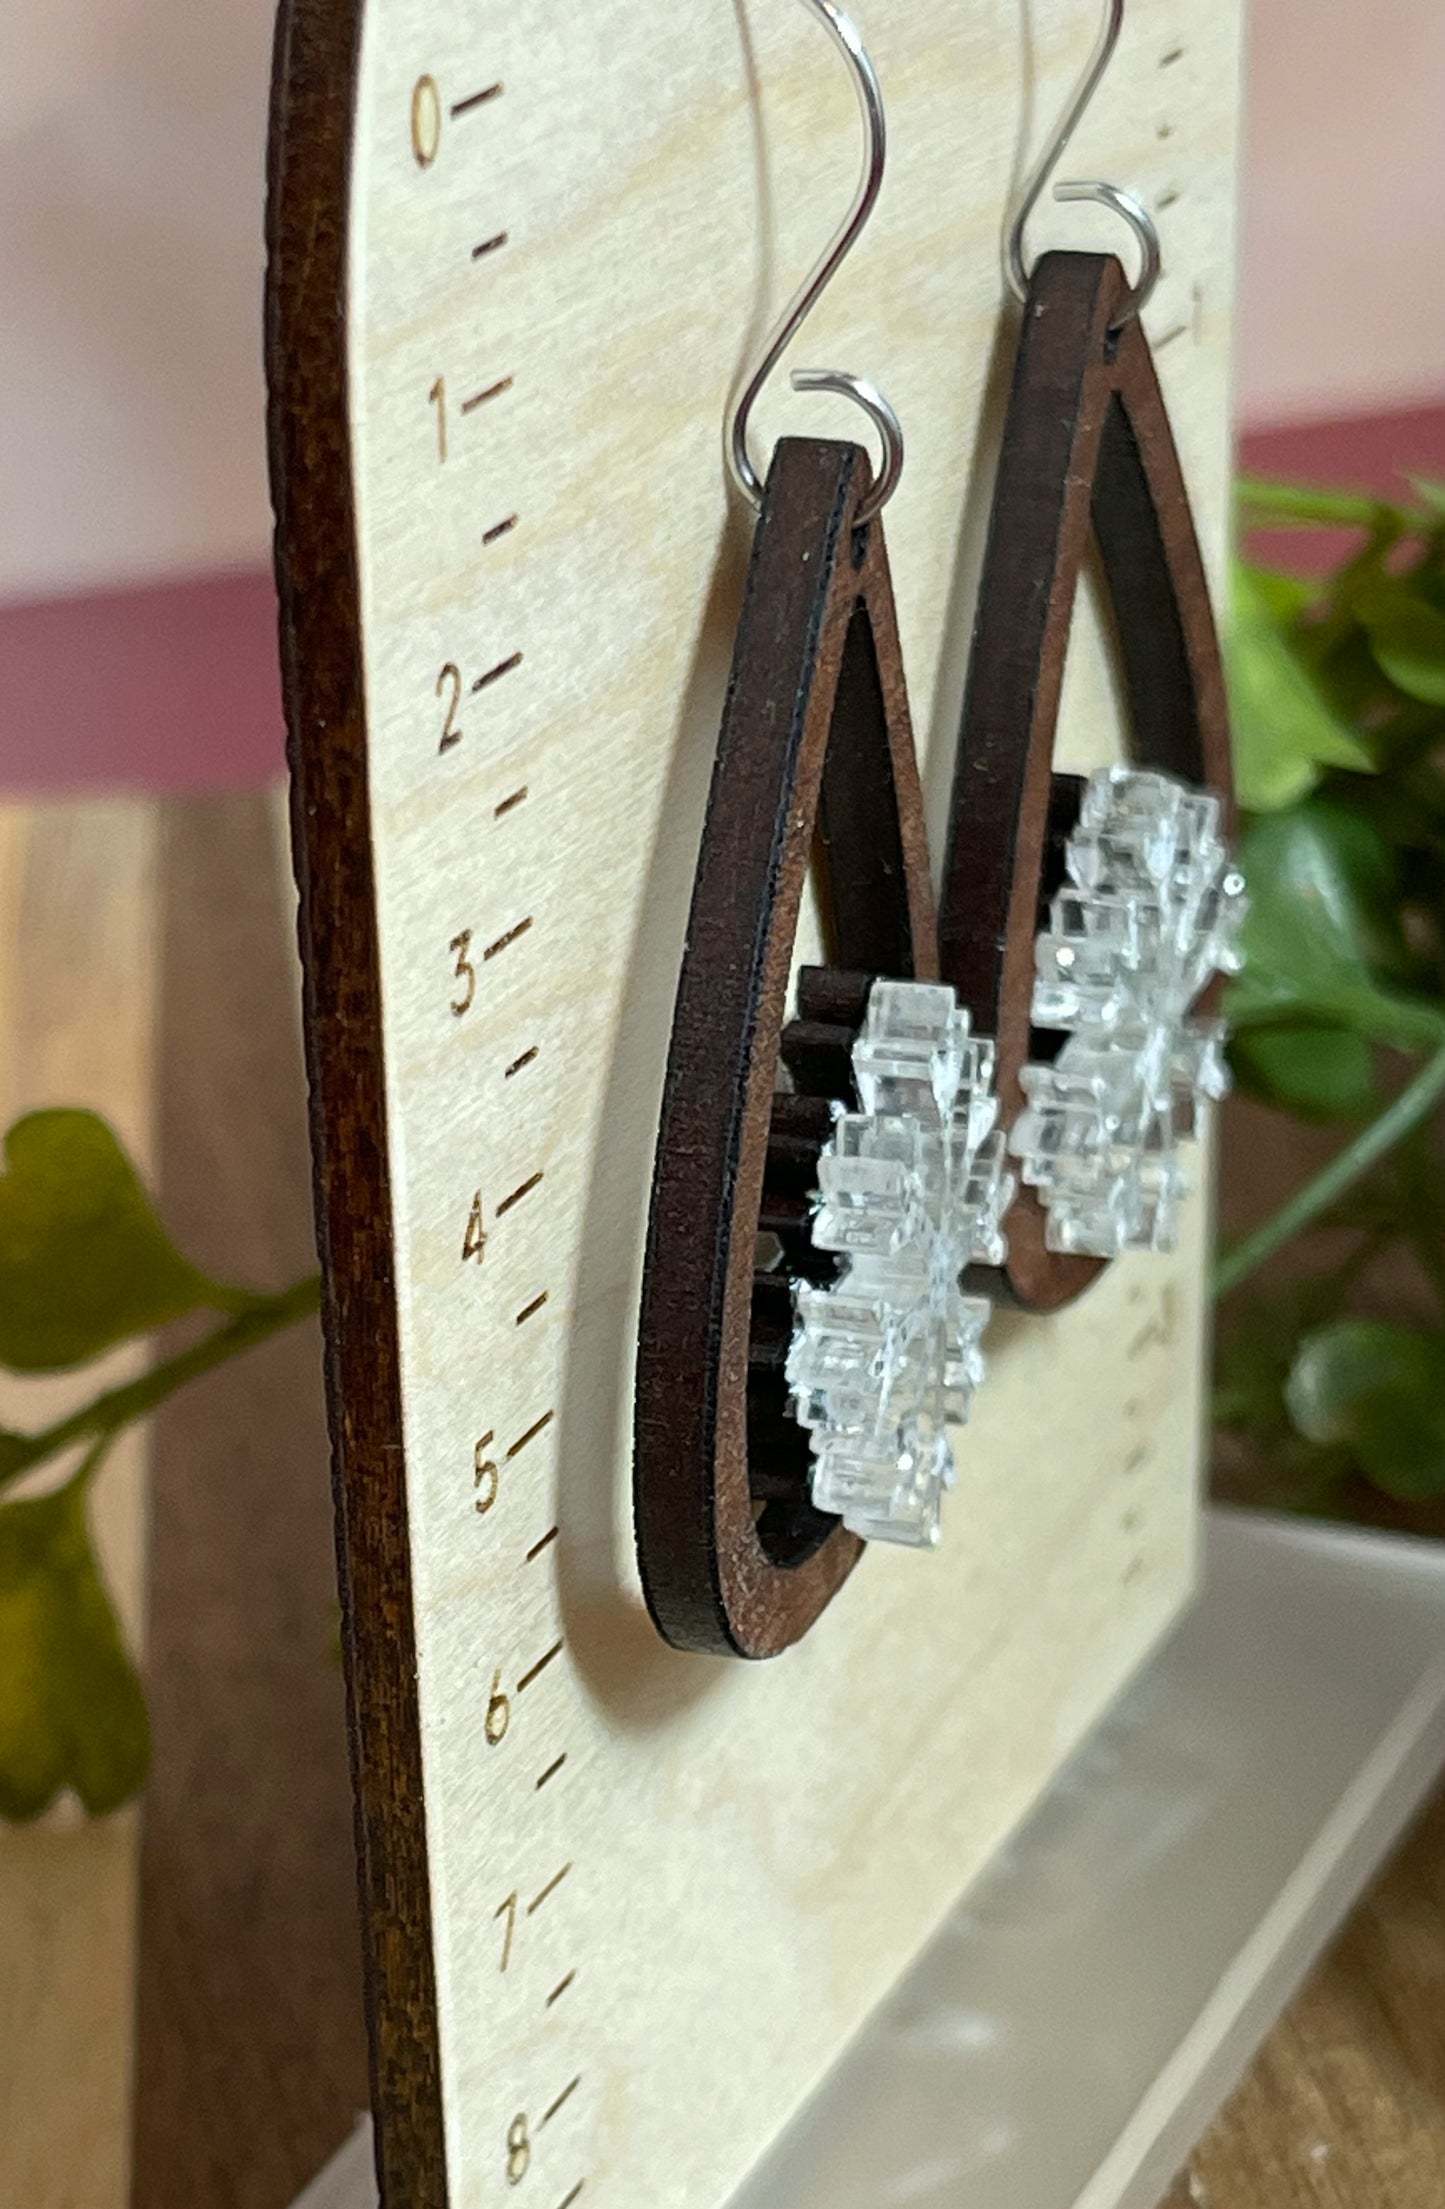 Sapele and Sparkling Snowflake Earrings